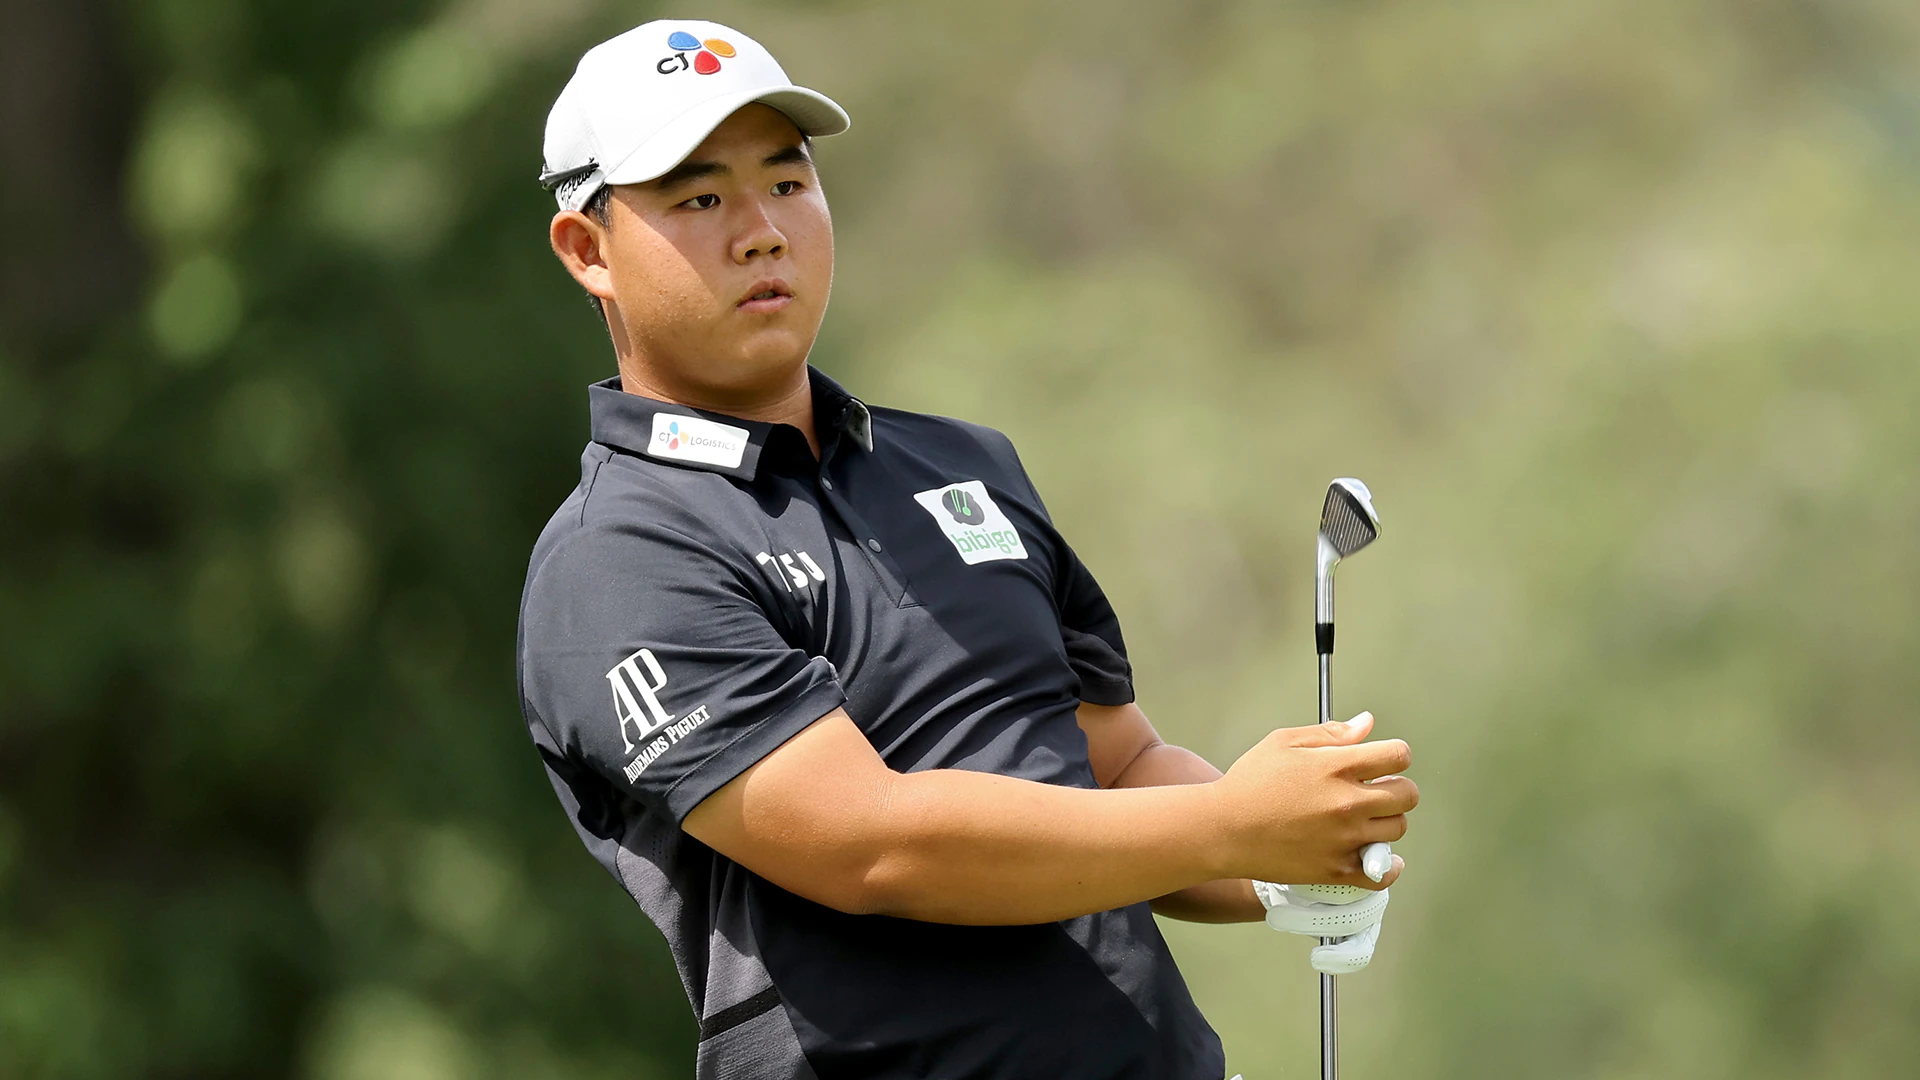 Next stop for Tom Kim after T-4 in Detroit: the PGA Tour